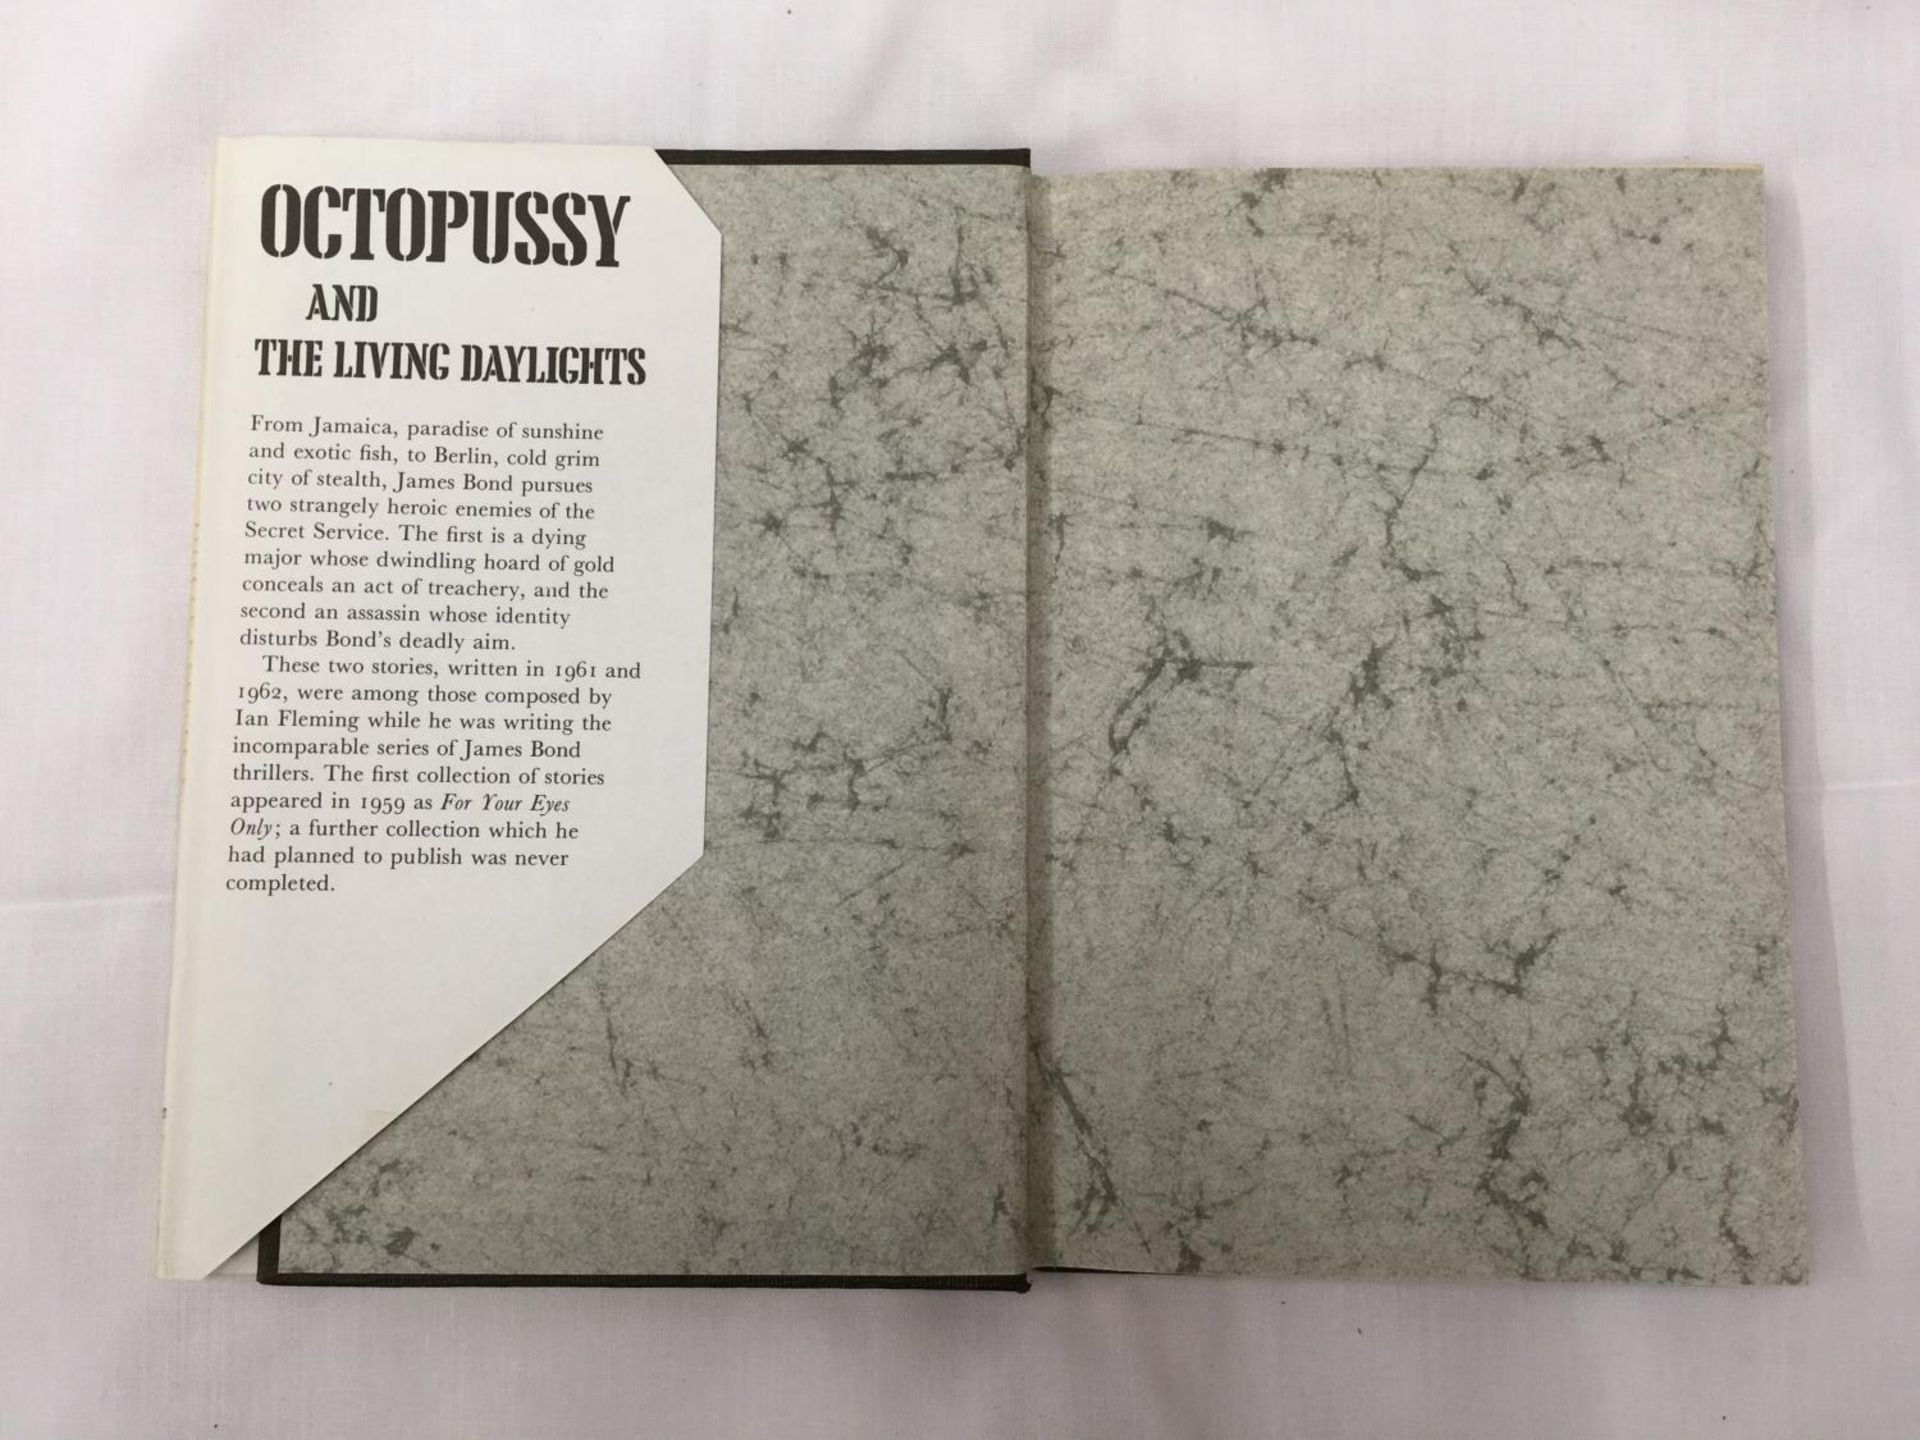 A FIRST EDITION JAMES BOND NOVEL - OCTOPUSSY AND THE LIVING DAYLIGHTS BY IAN FLEMING, HARDBACK - Image 4 of 11